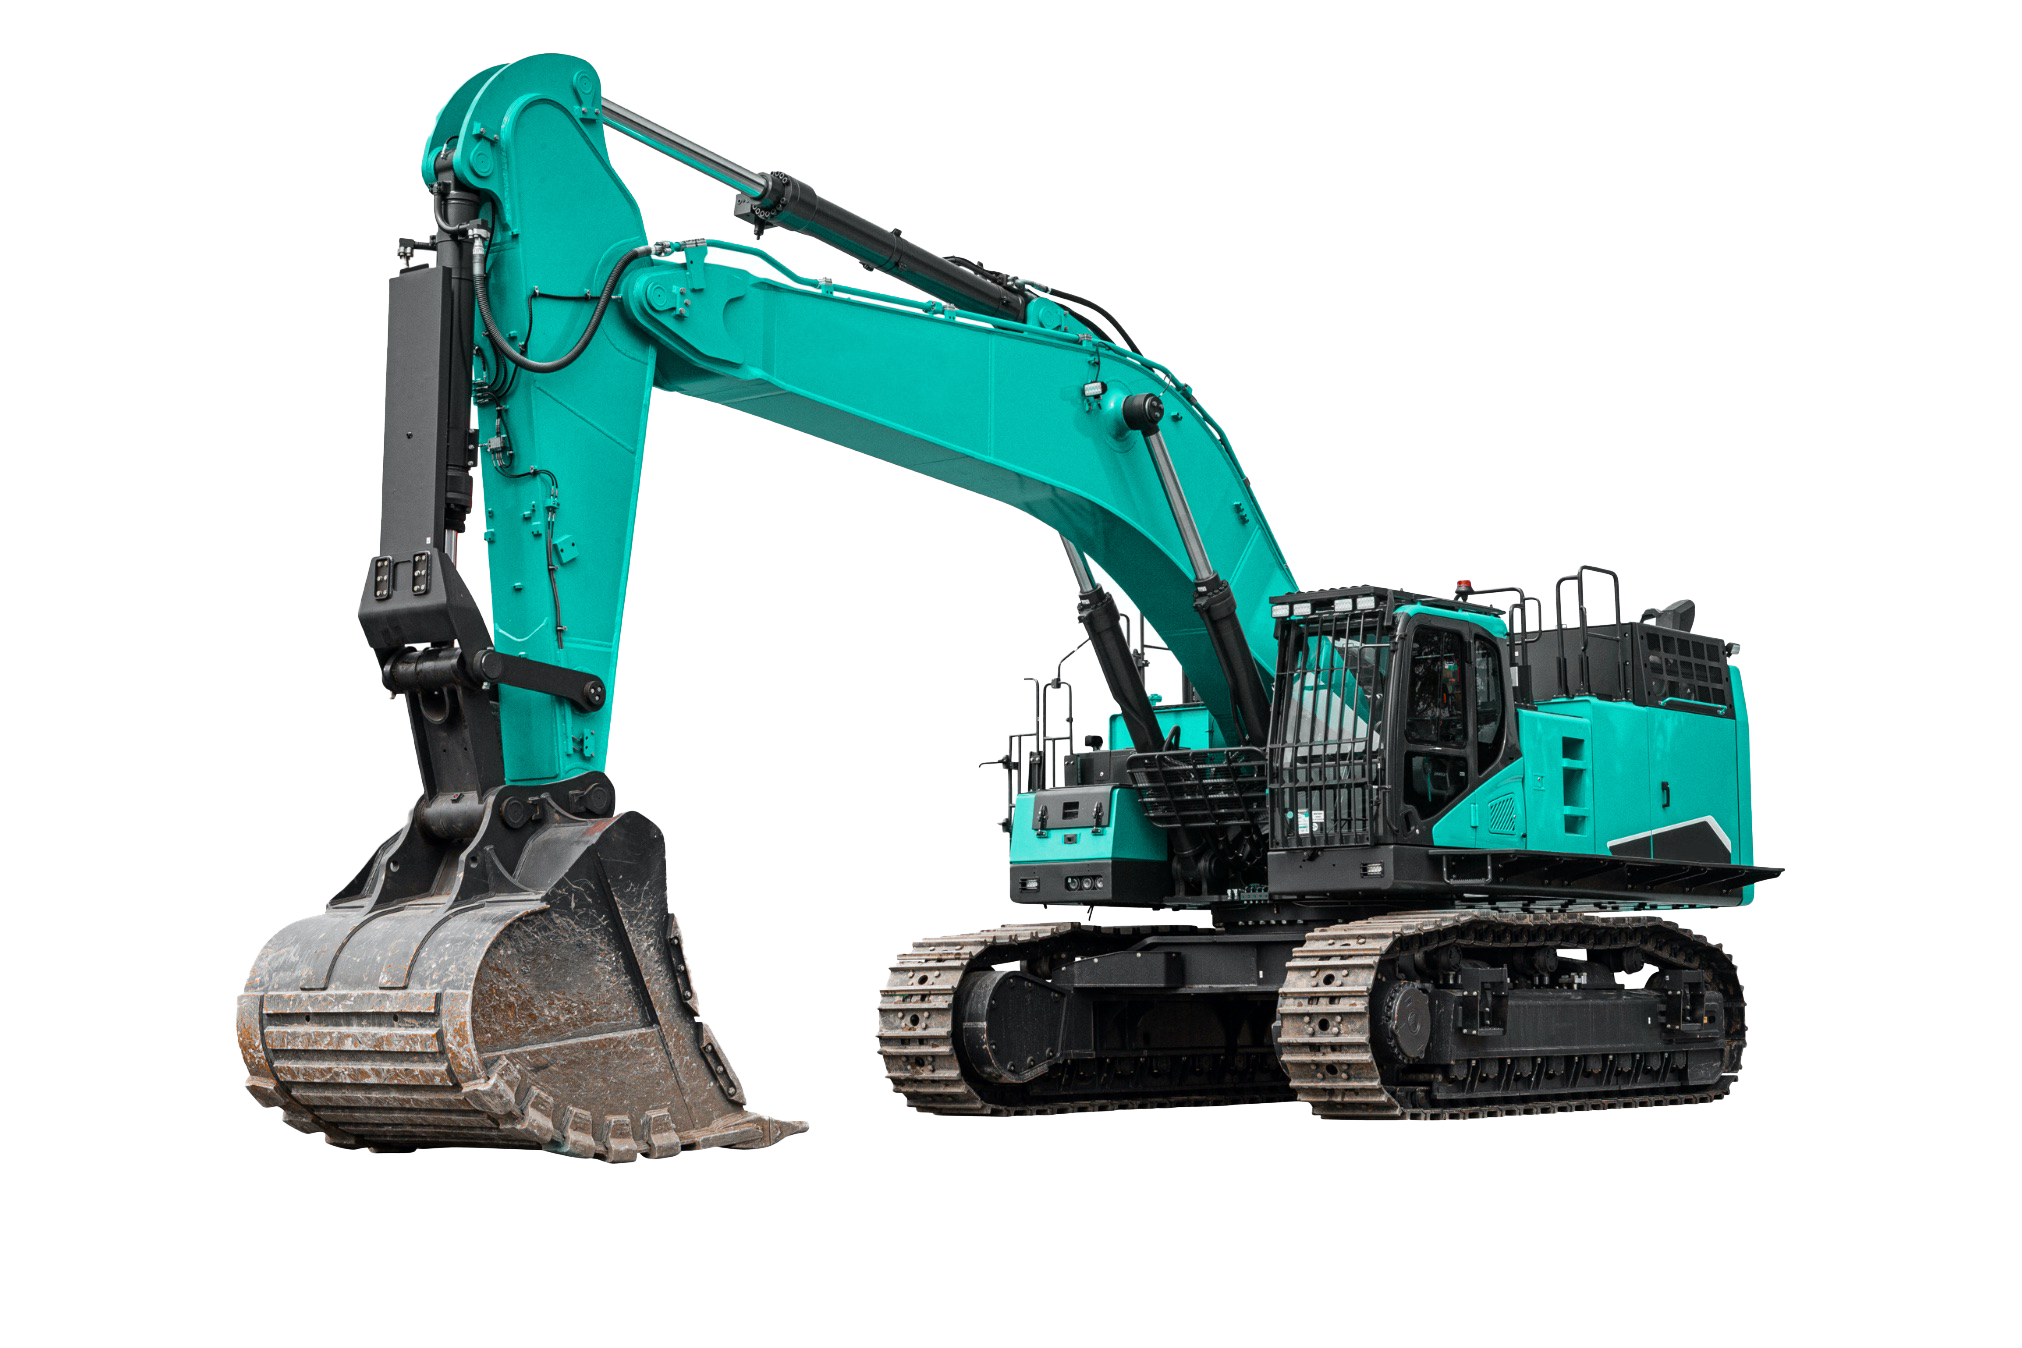 22 Tonne Excavator with Reduced Tail Swing